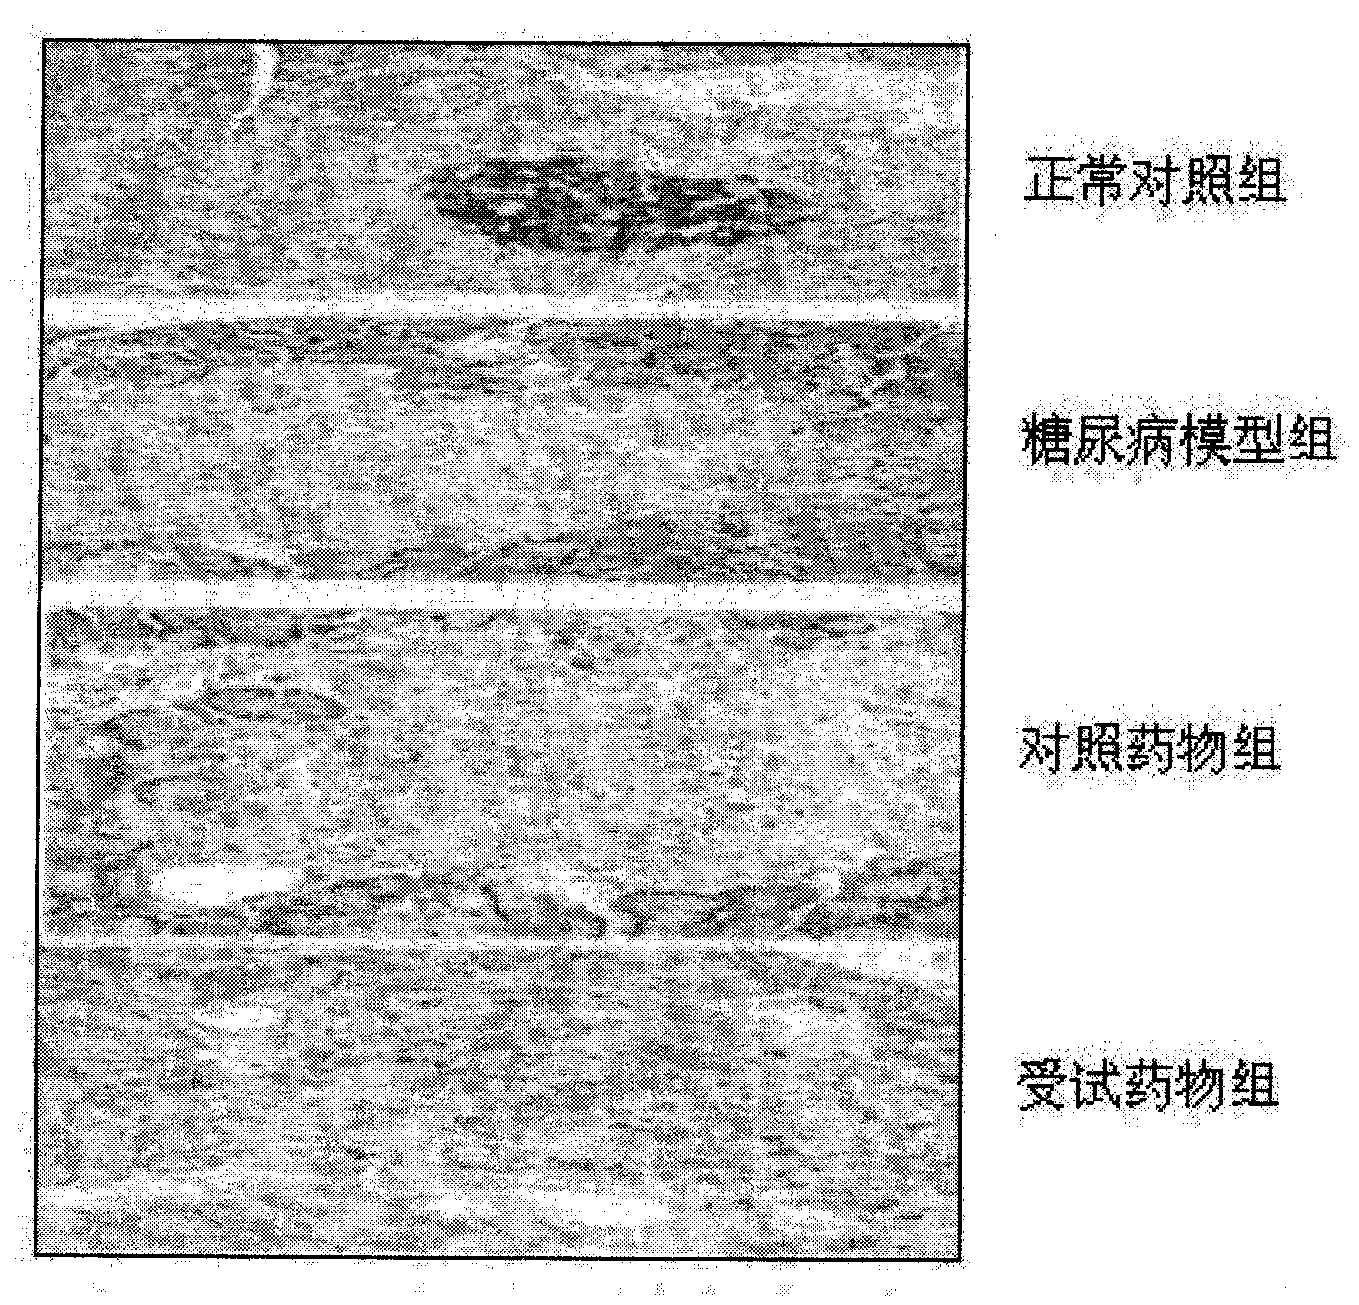 Healthcare product or medicine for preventing diabetes complication and senium and preparation method thereof